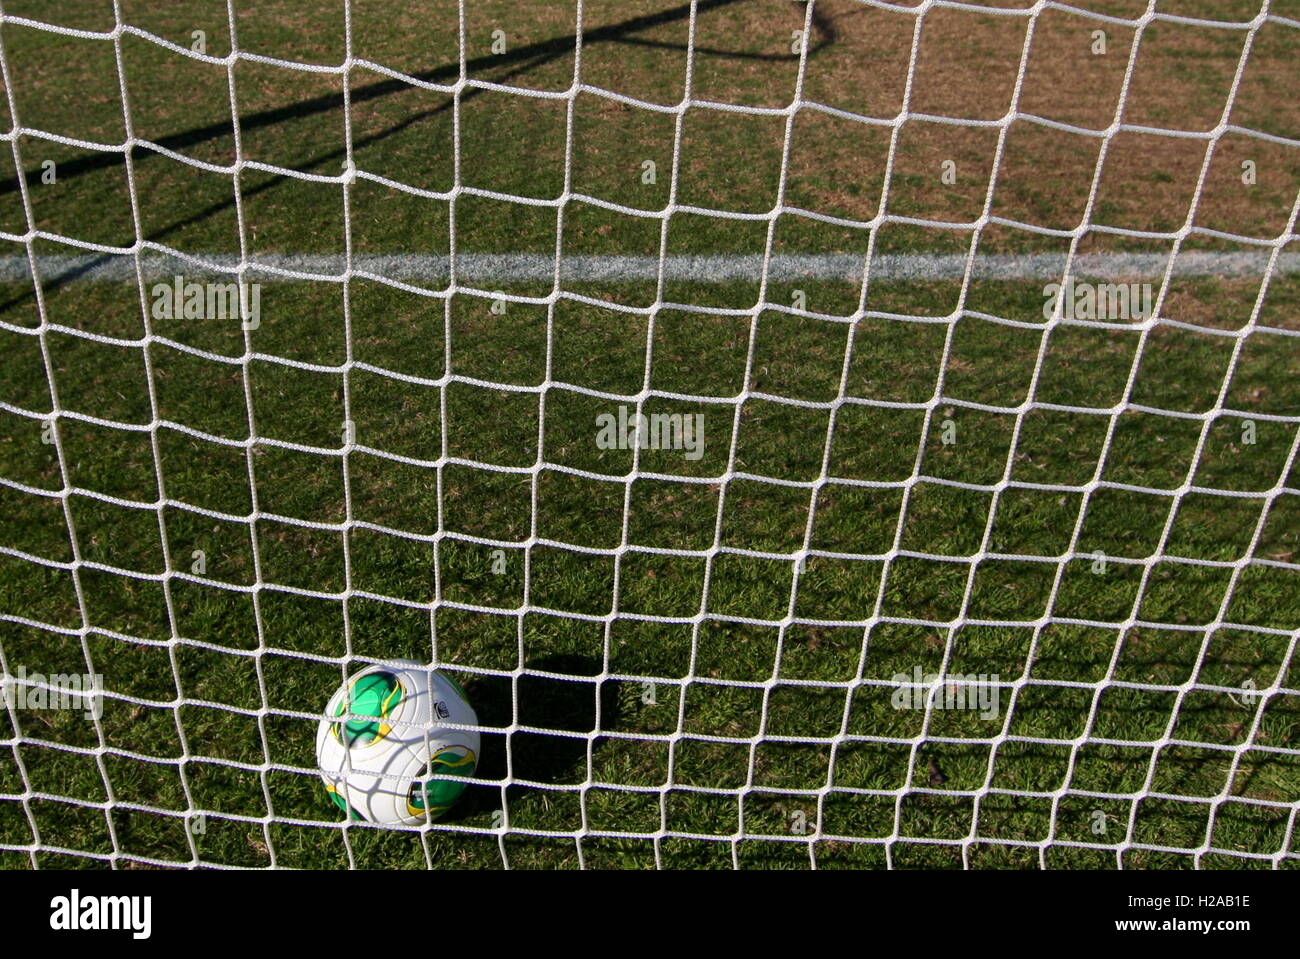 Generic Soccer showing football in goal with net at La Manga Club, Los Belones, Spain February 2014.    Photo by Tony Henshaw Stock Photo